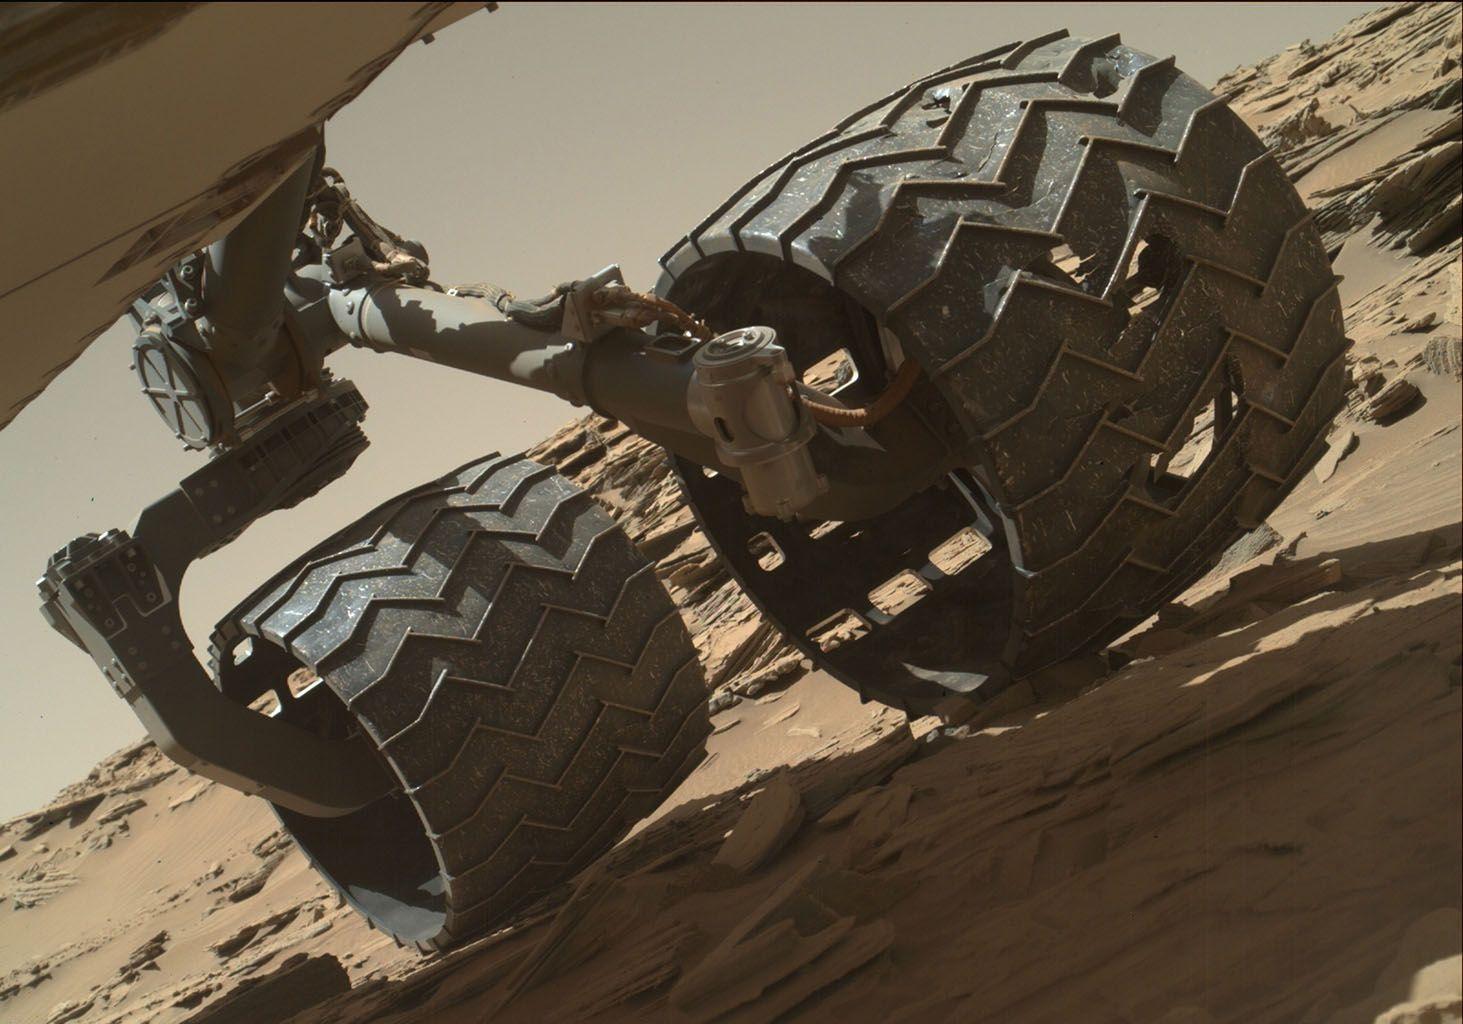 Space Image. Routine Inspection of Rover Wheel Wear and Tear